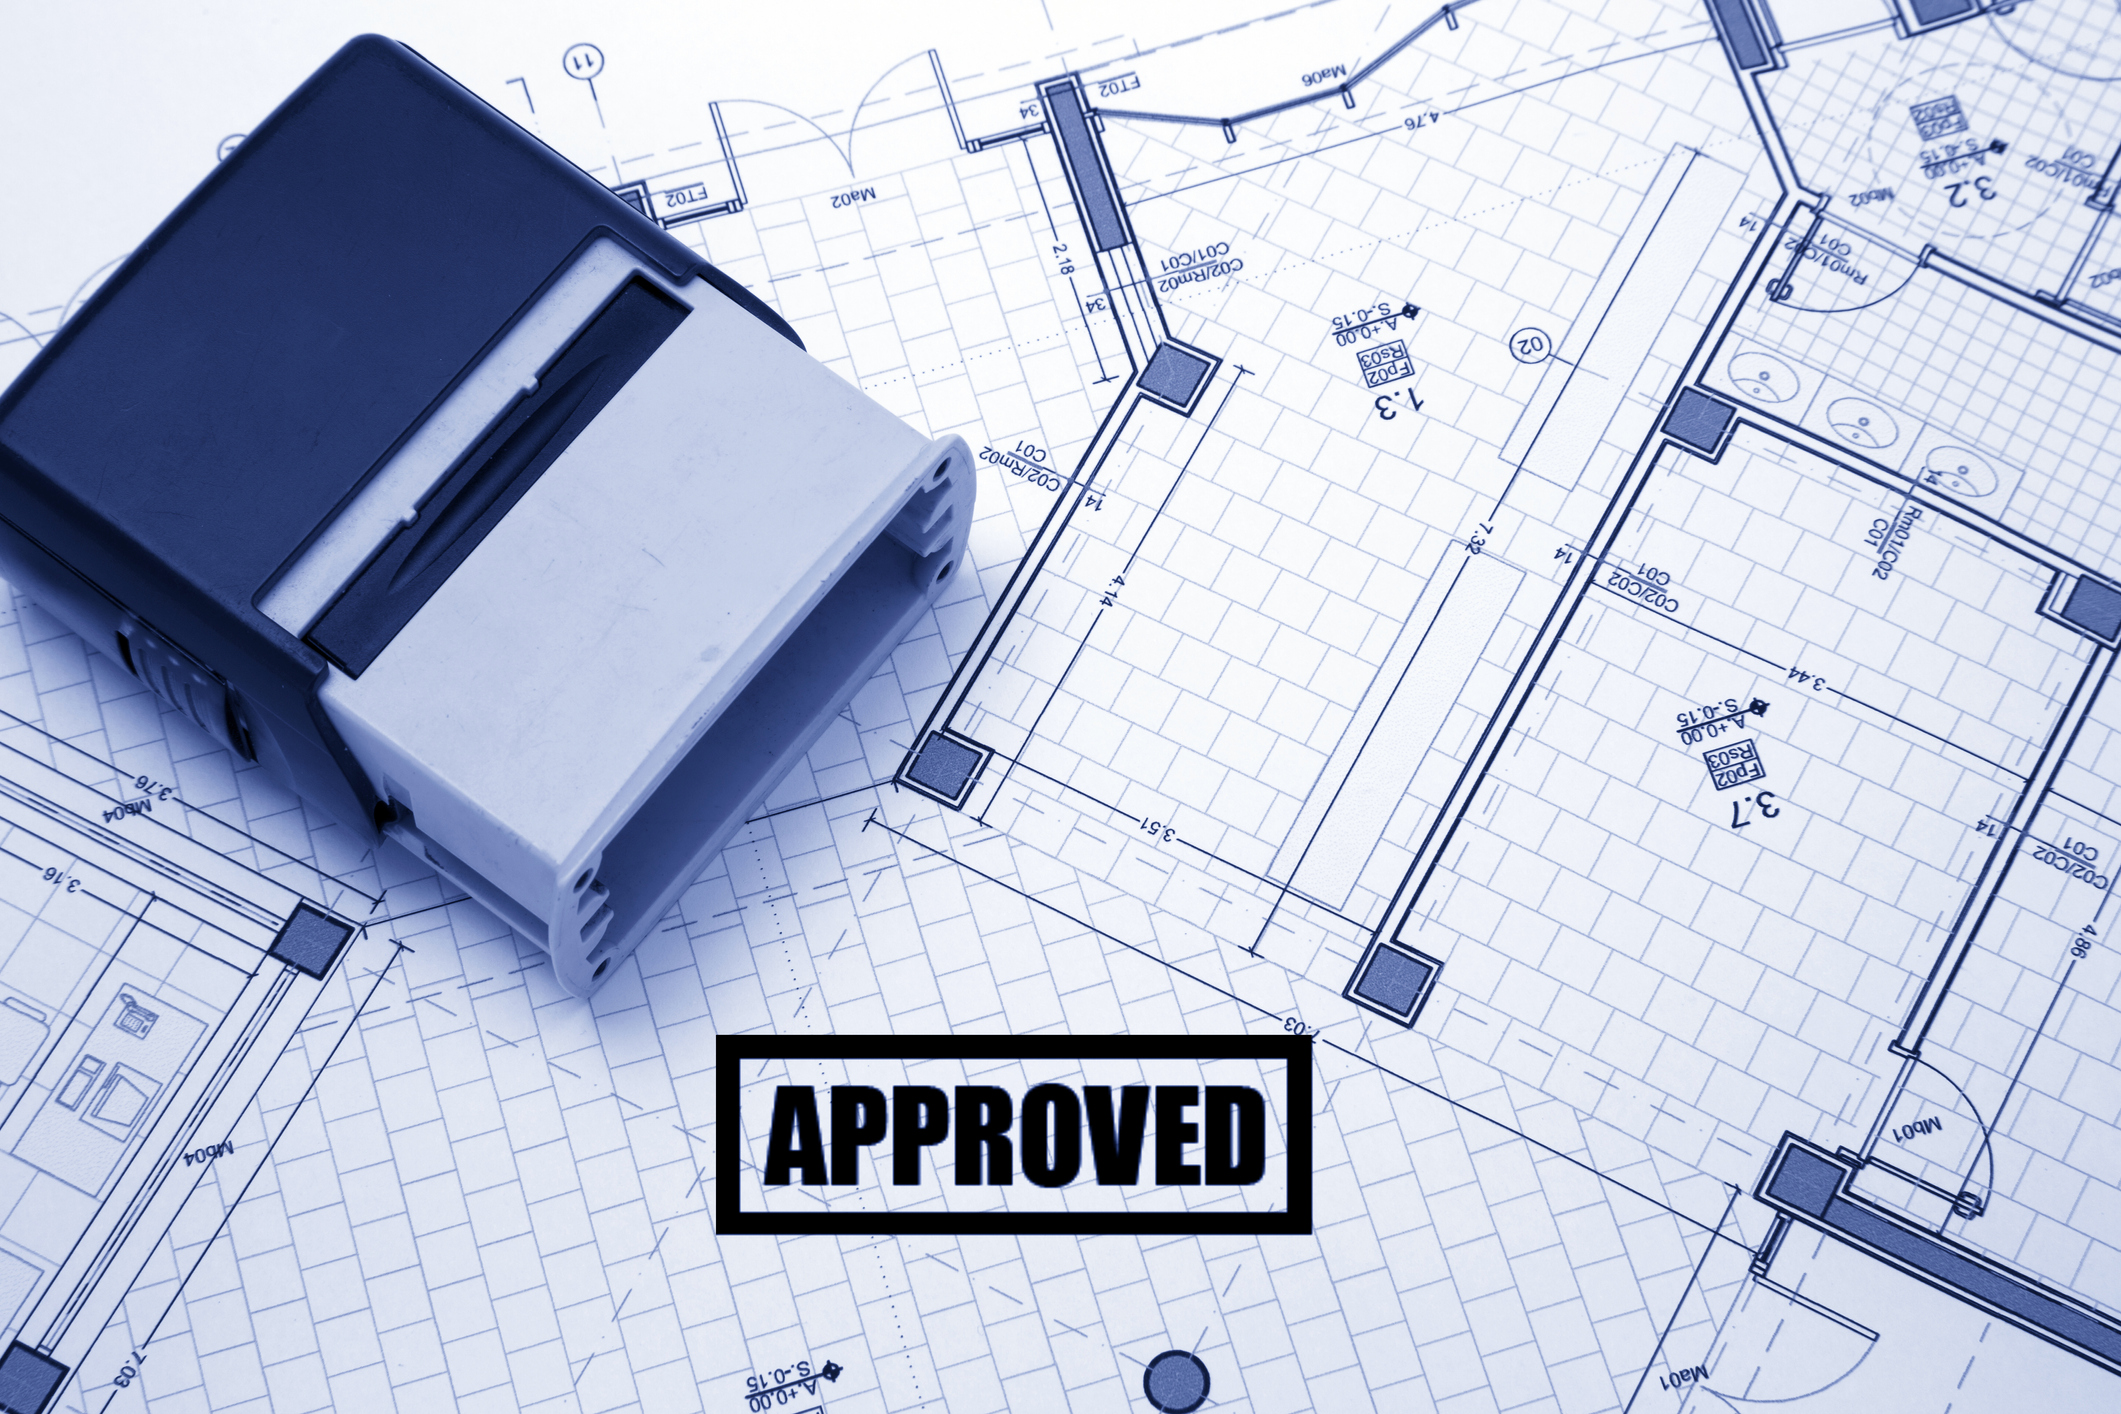 planning permission approval iStock-514343743